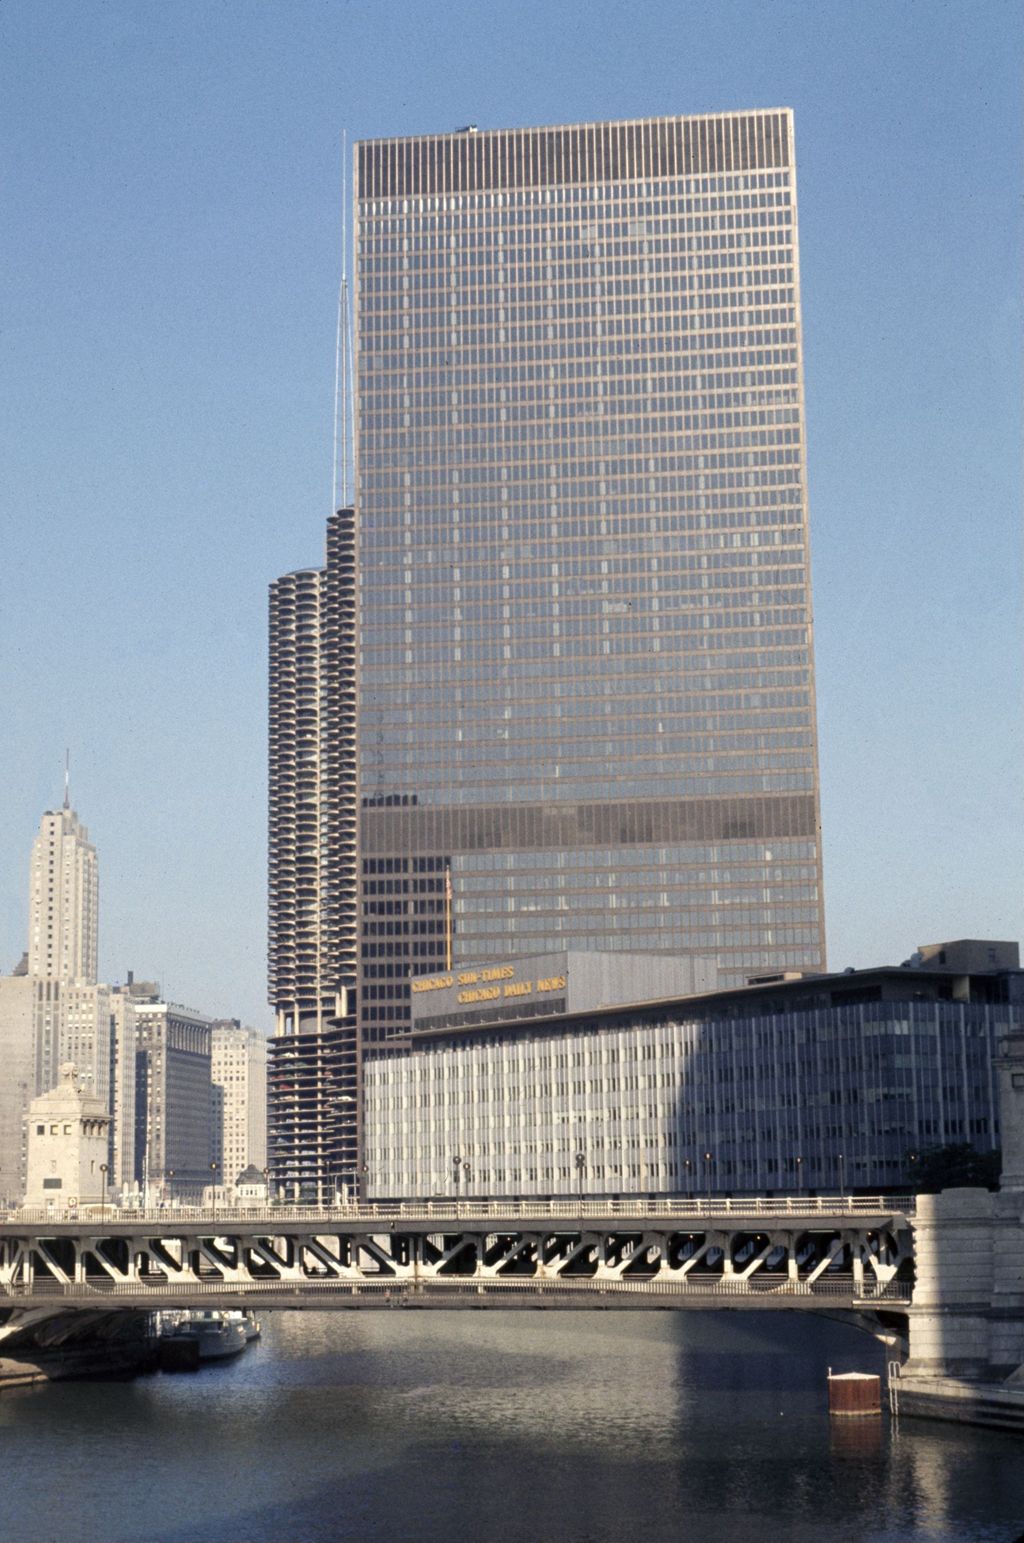 Miniature of IBM Building and Sun-Times Building from the Chicago River